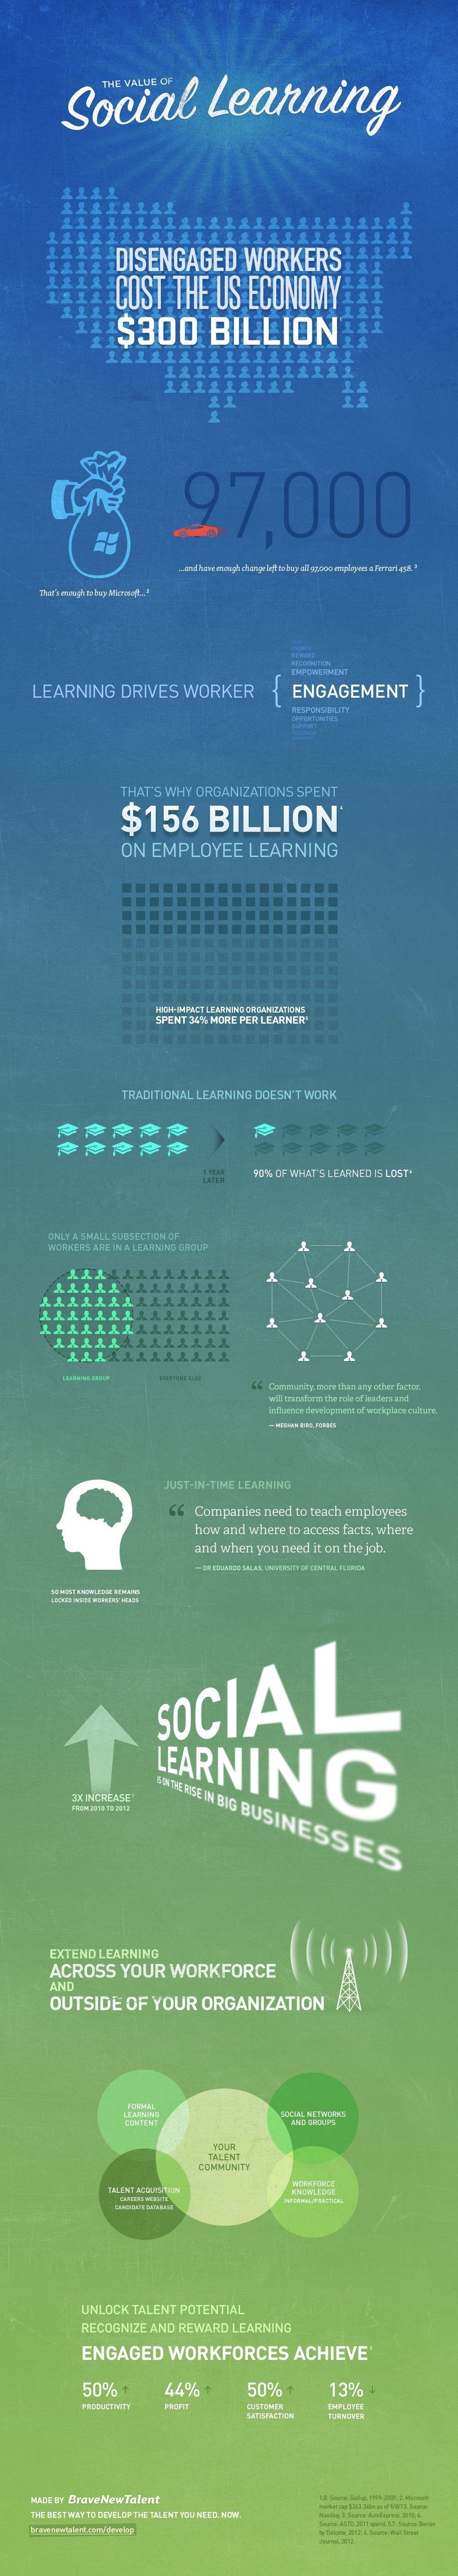 The Value of Social Learning Infographic